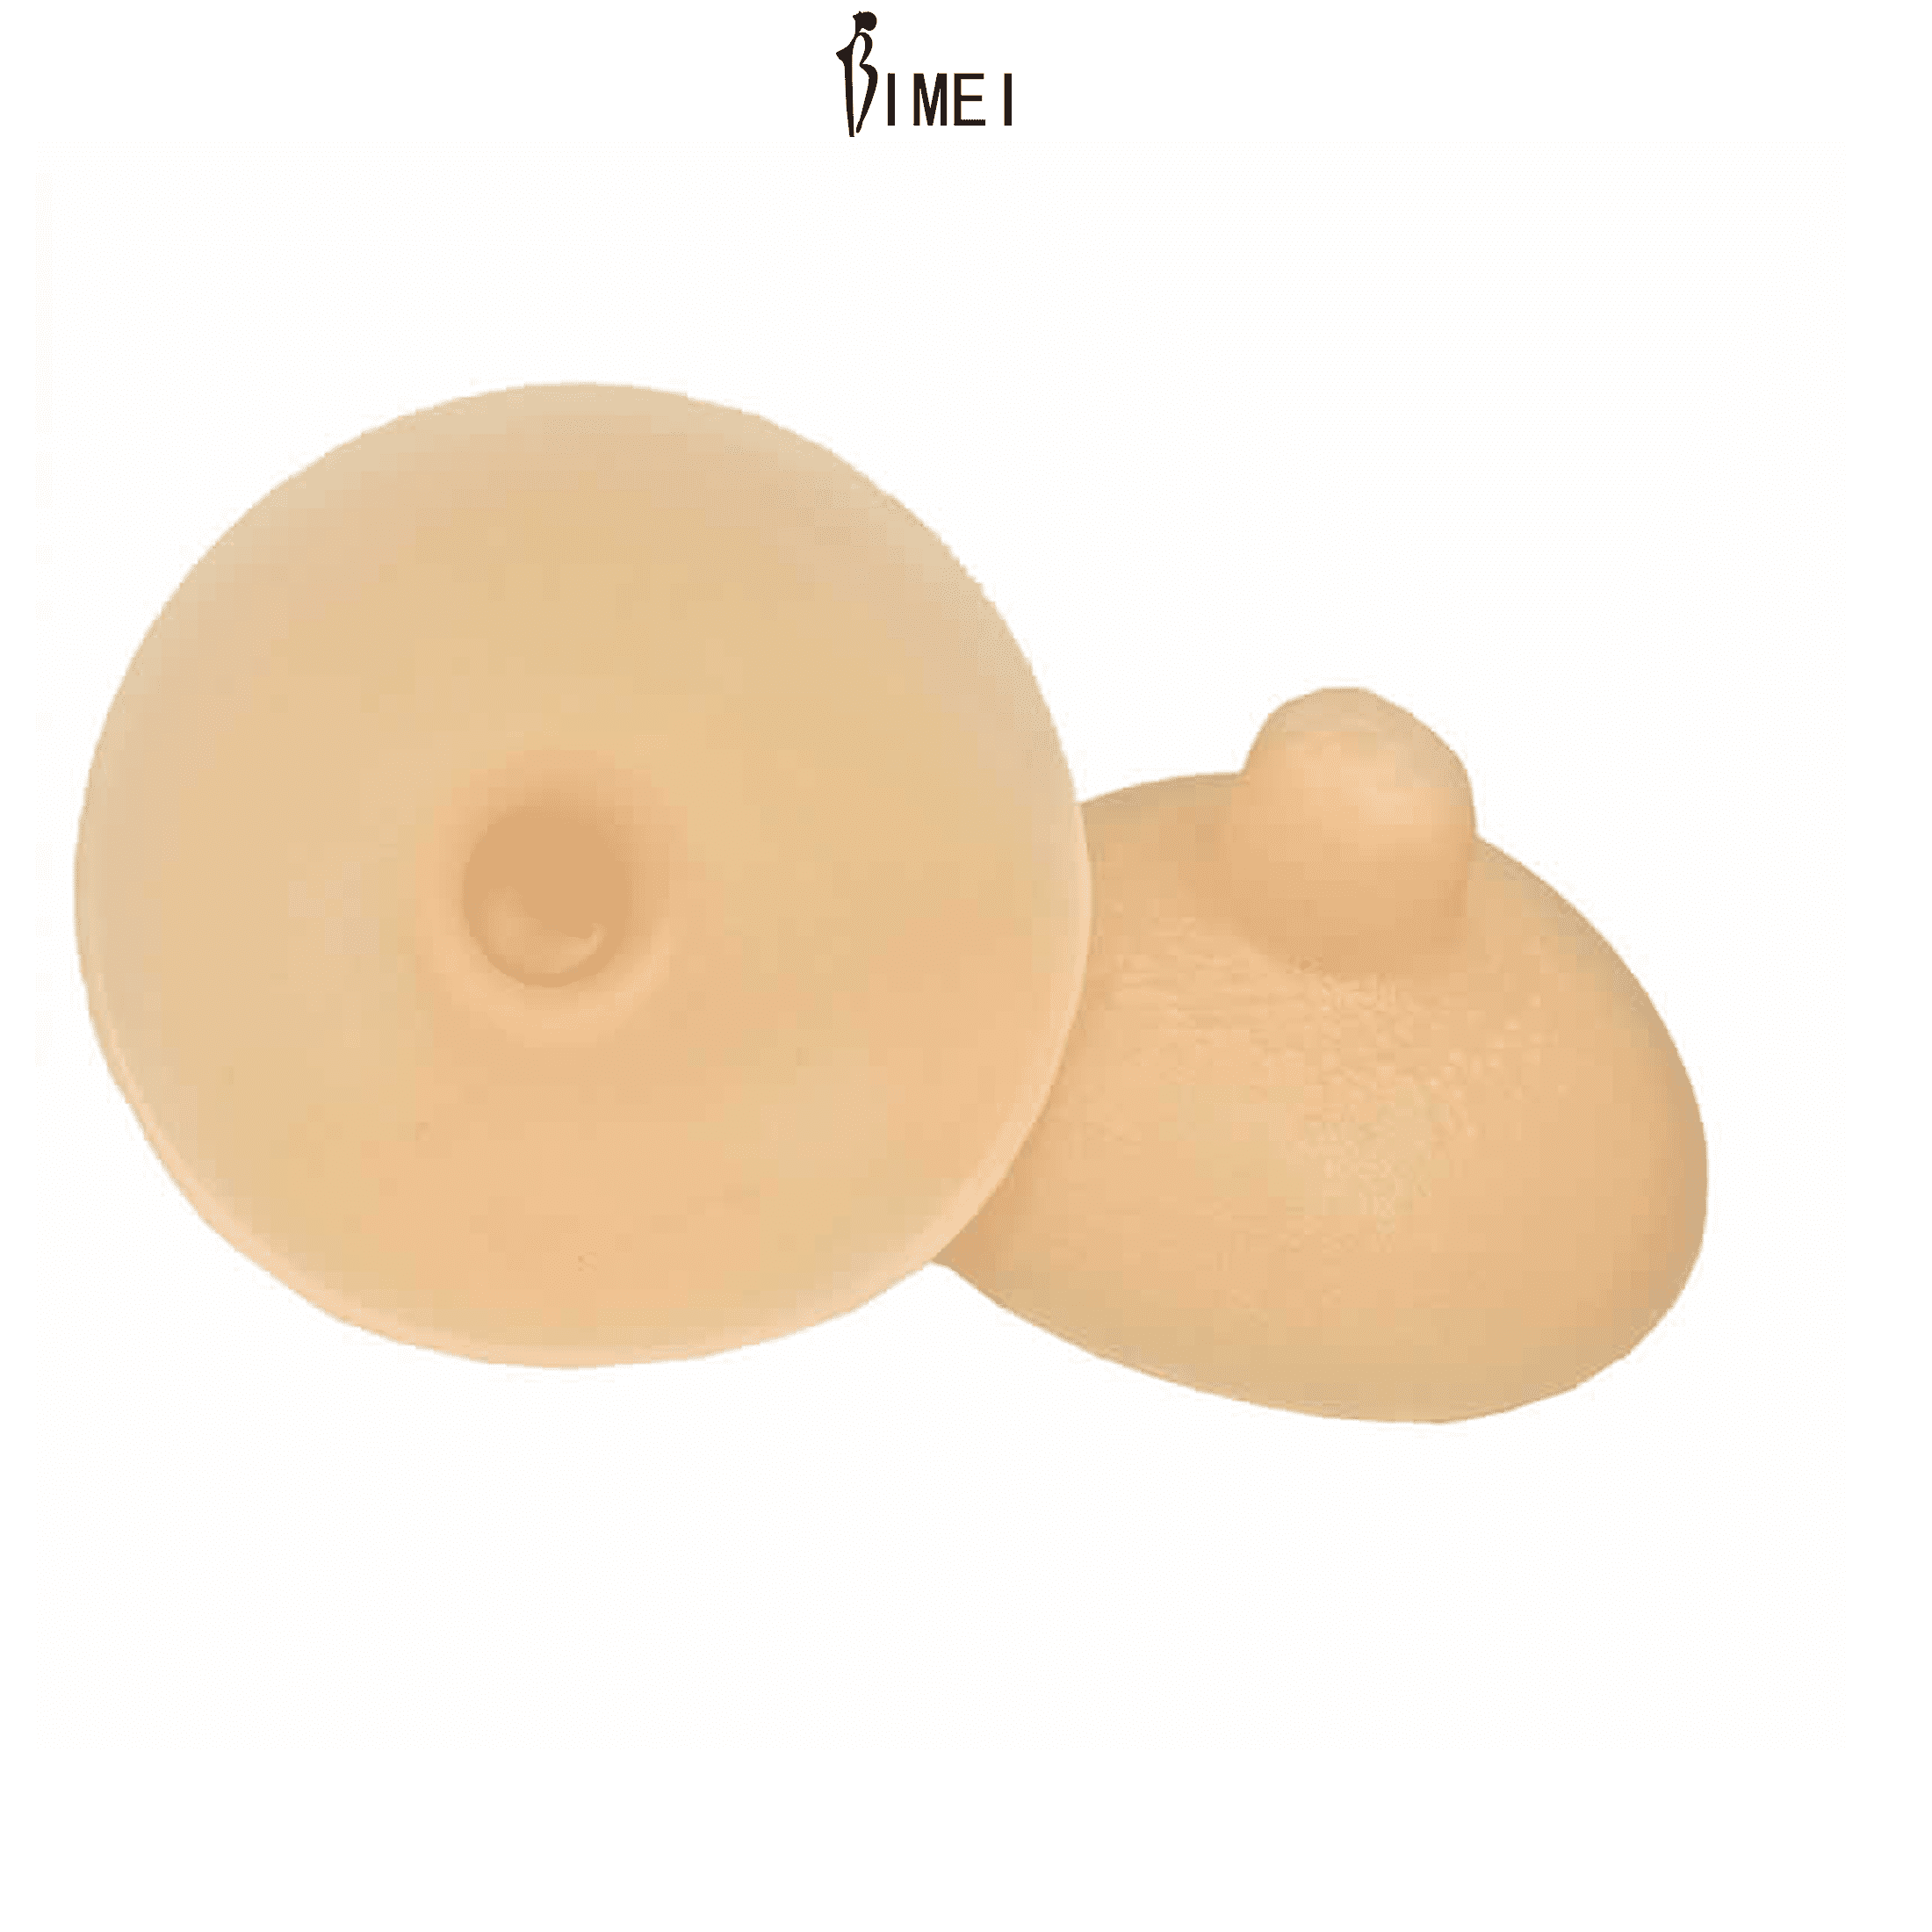 Bimei self-adhesive extension shaped breast milk silicone